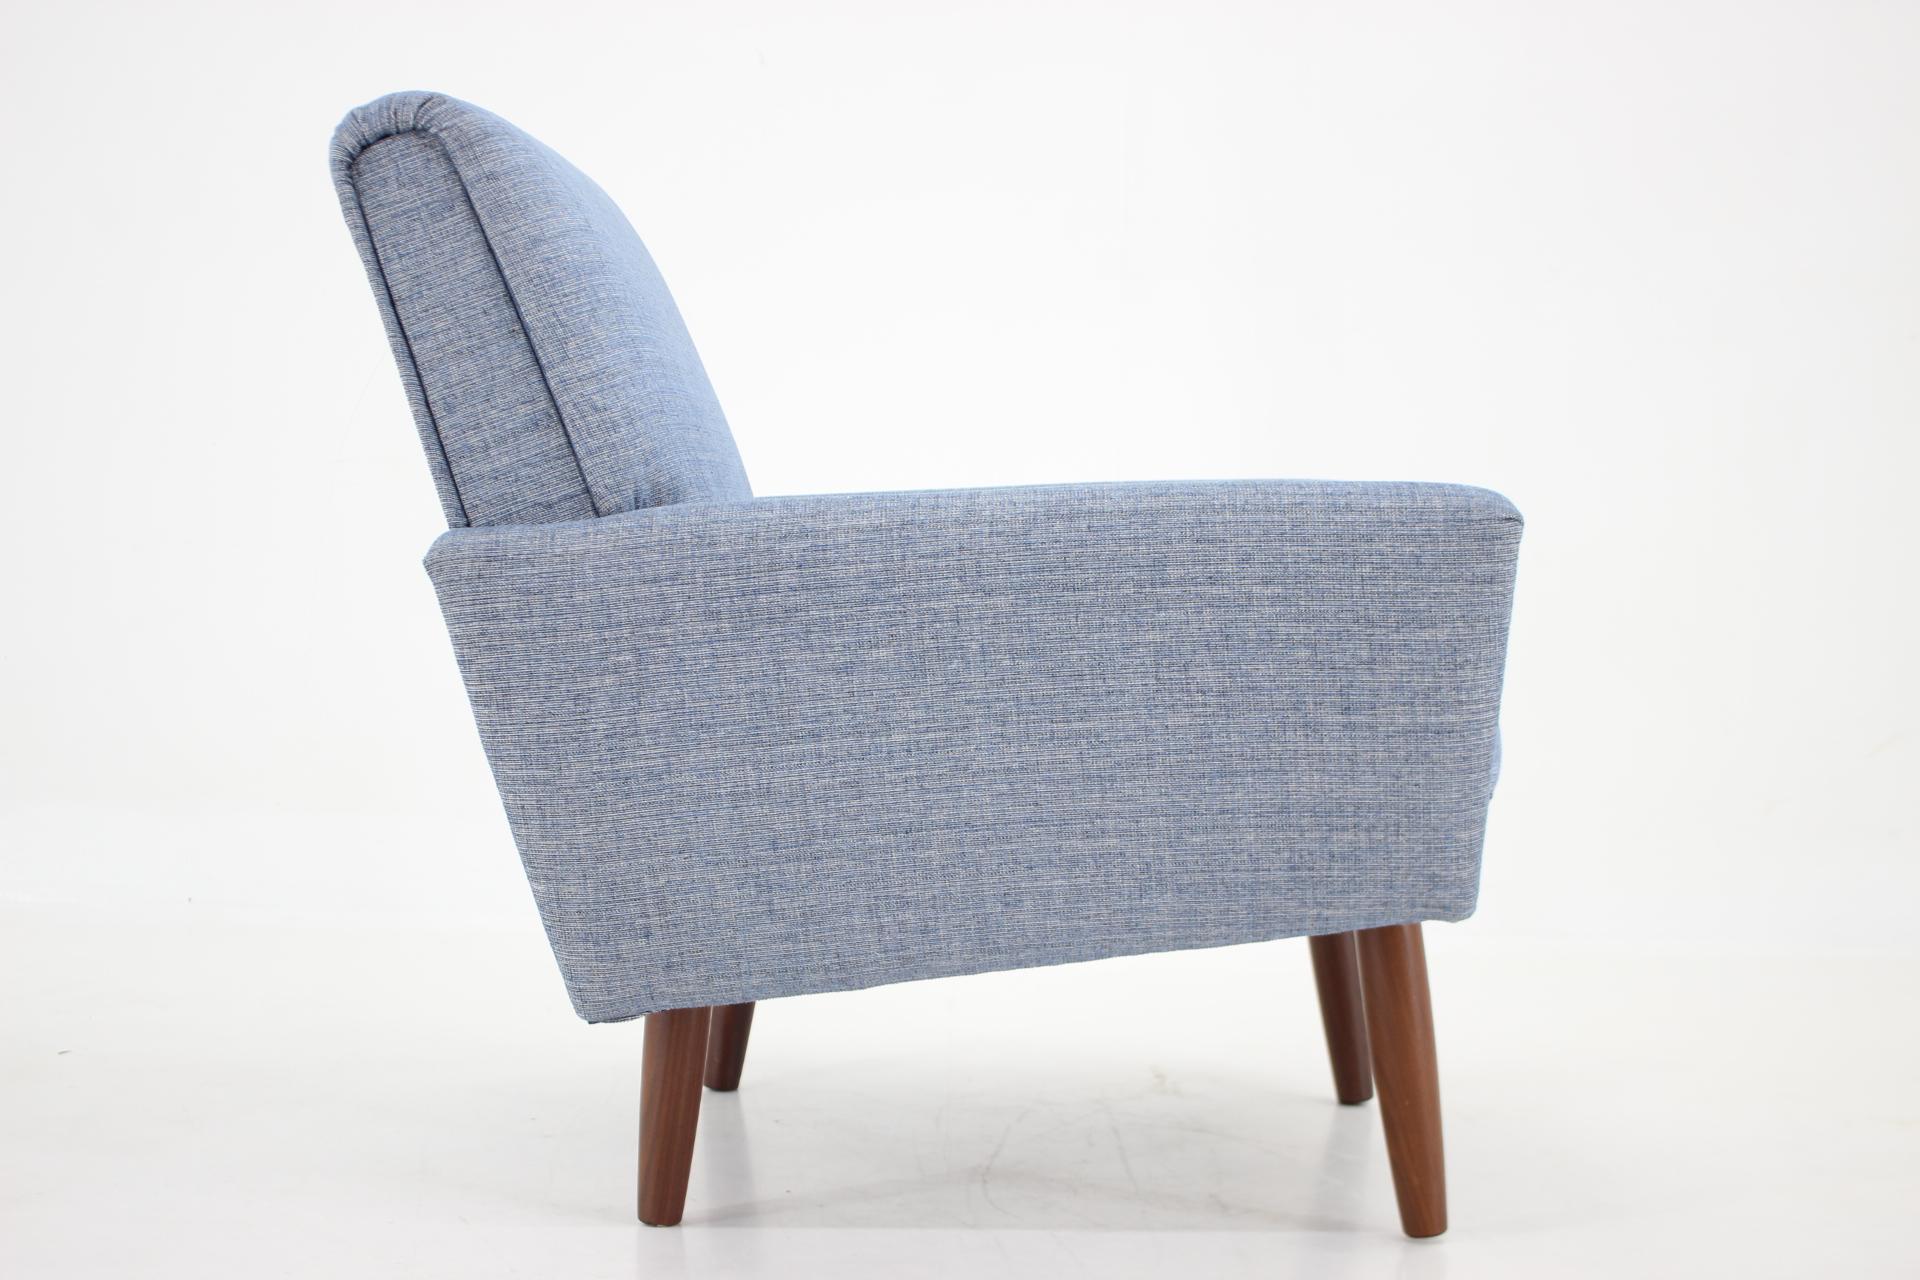 Mid-20th Century 1960s Danish Teak Armchair -Newly upholstered  For Sale